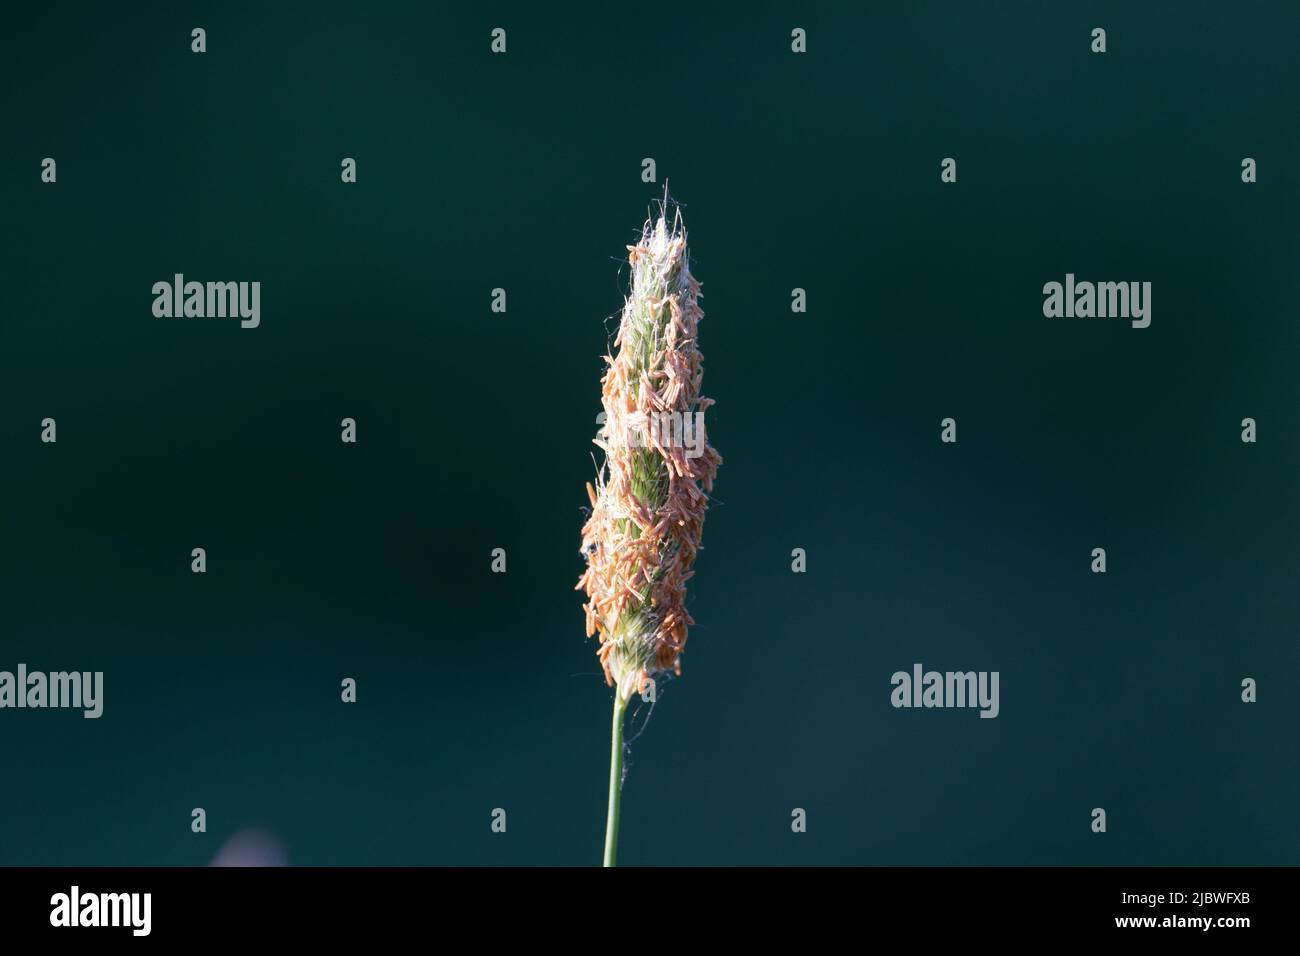 upright Timothy grass (Phleum pratense) seed head with back light isolated on a natural dark green background Stock Photo